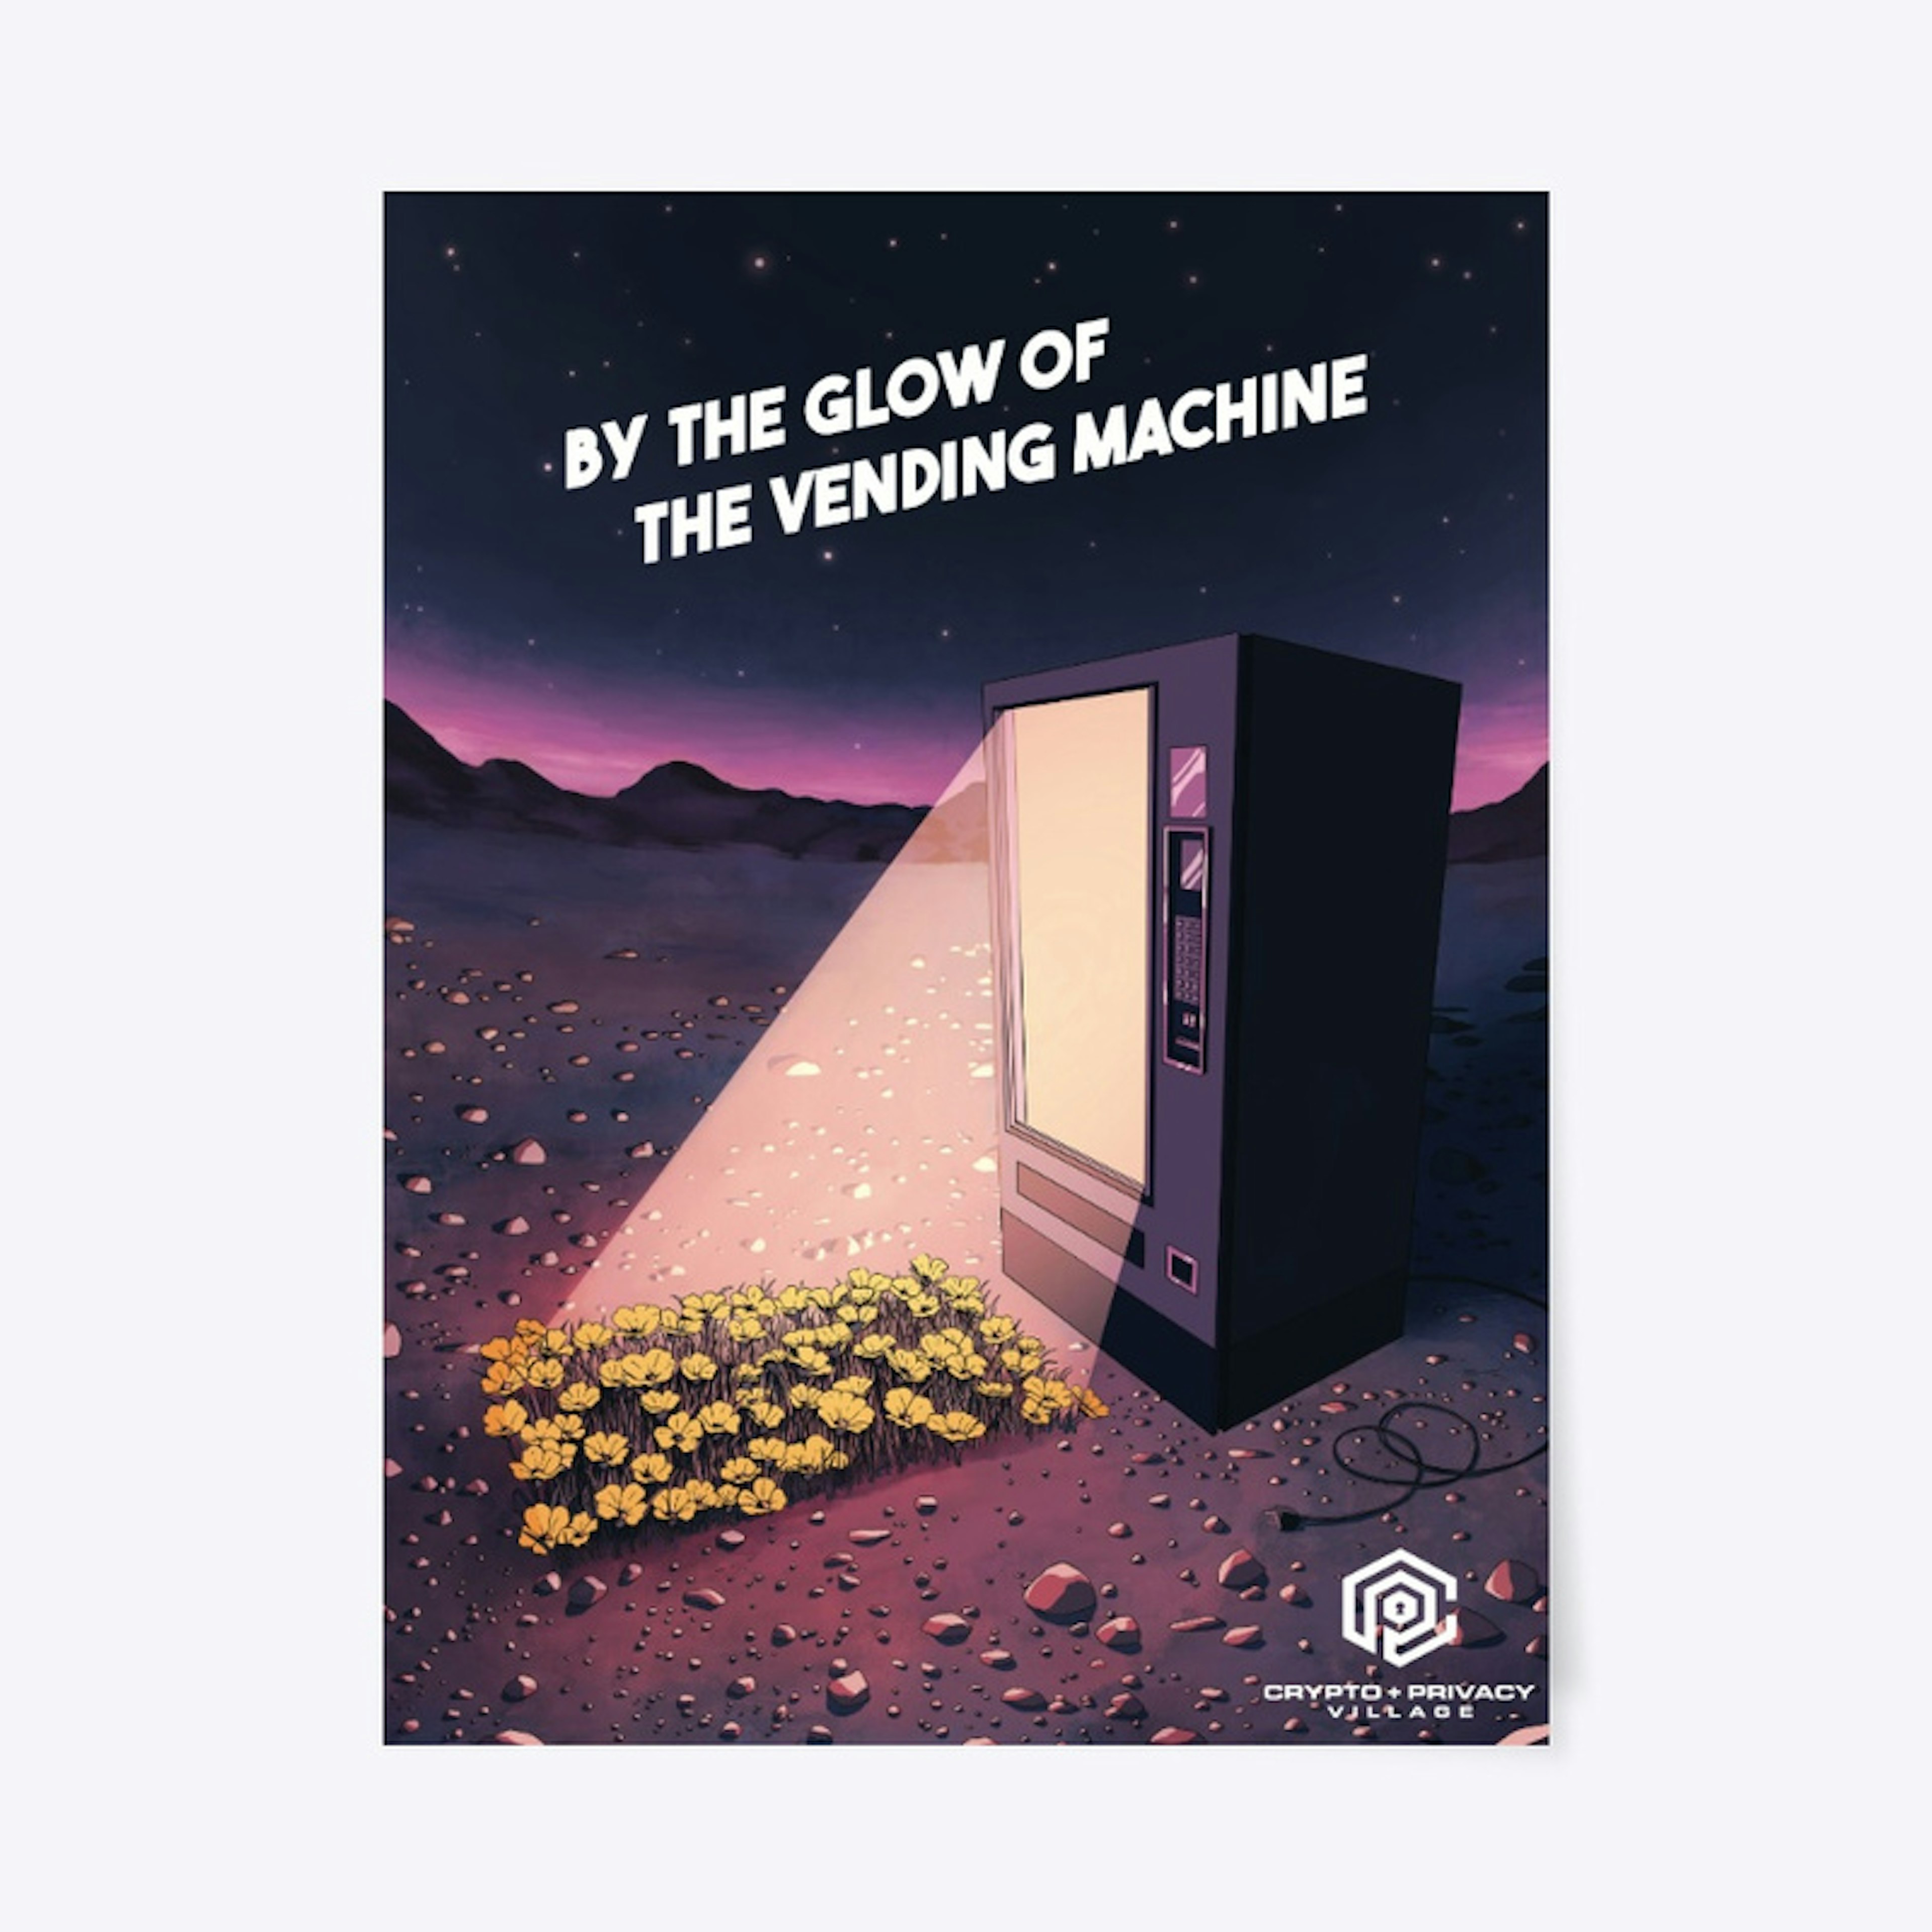 Glow of the Vending Machine Poster